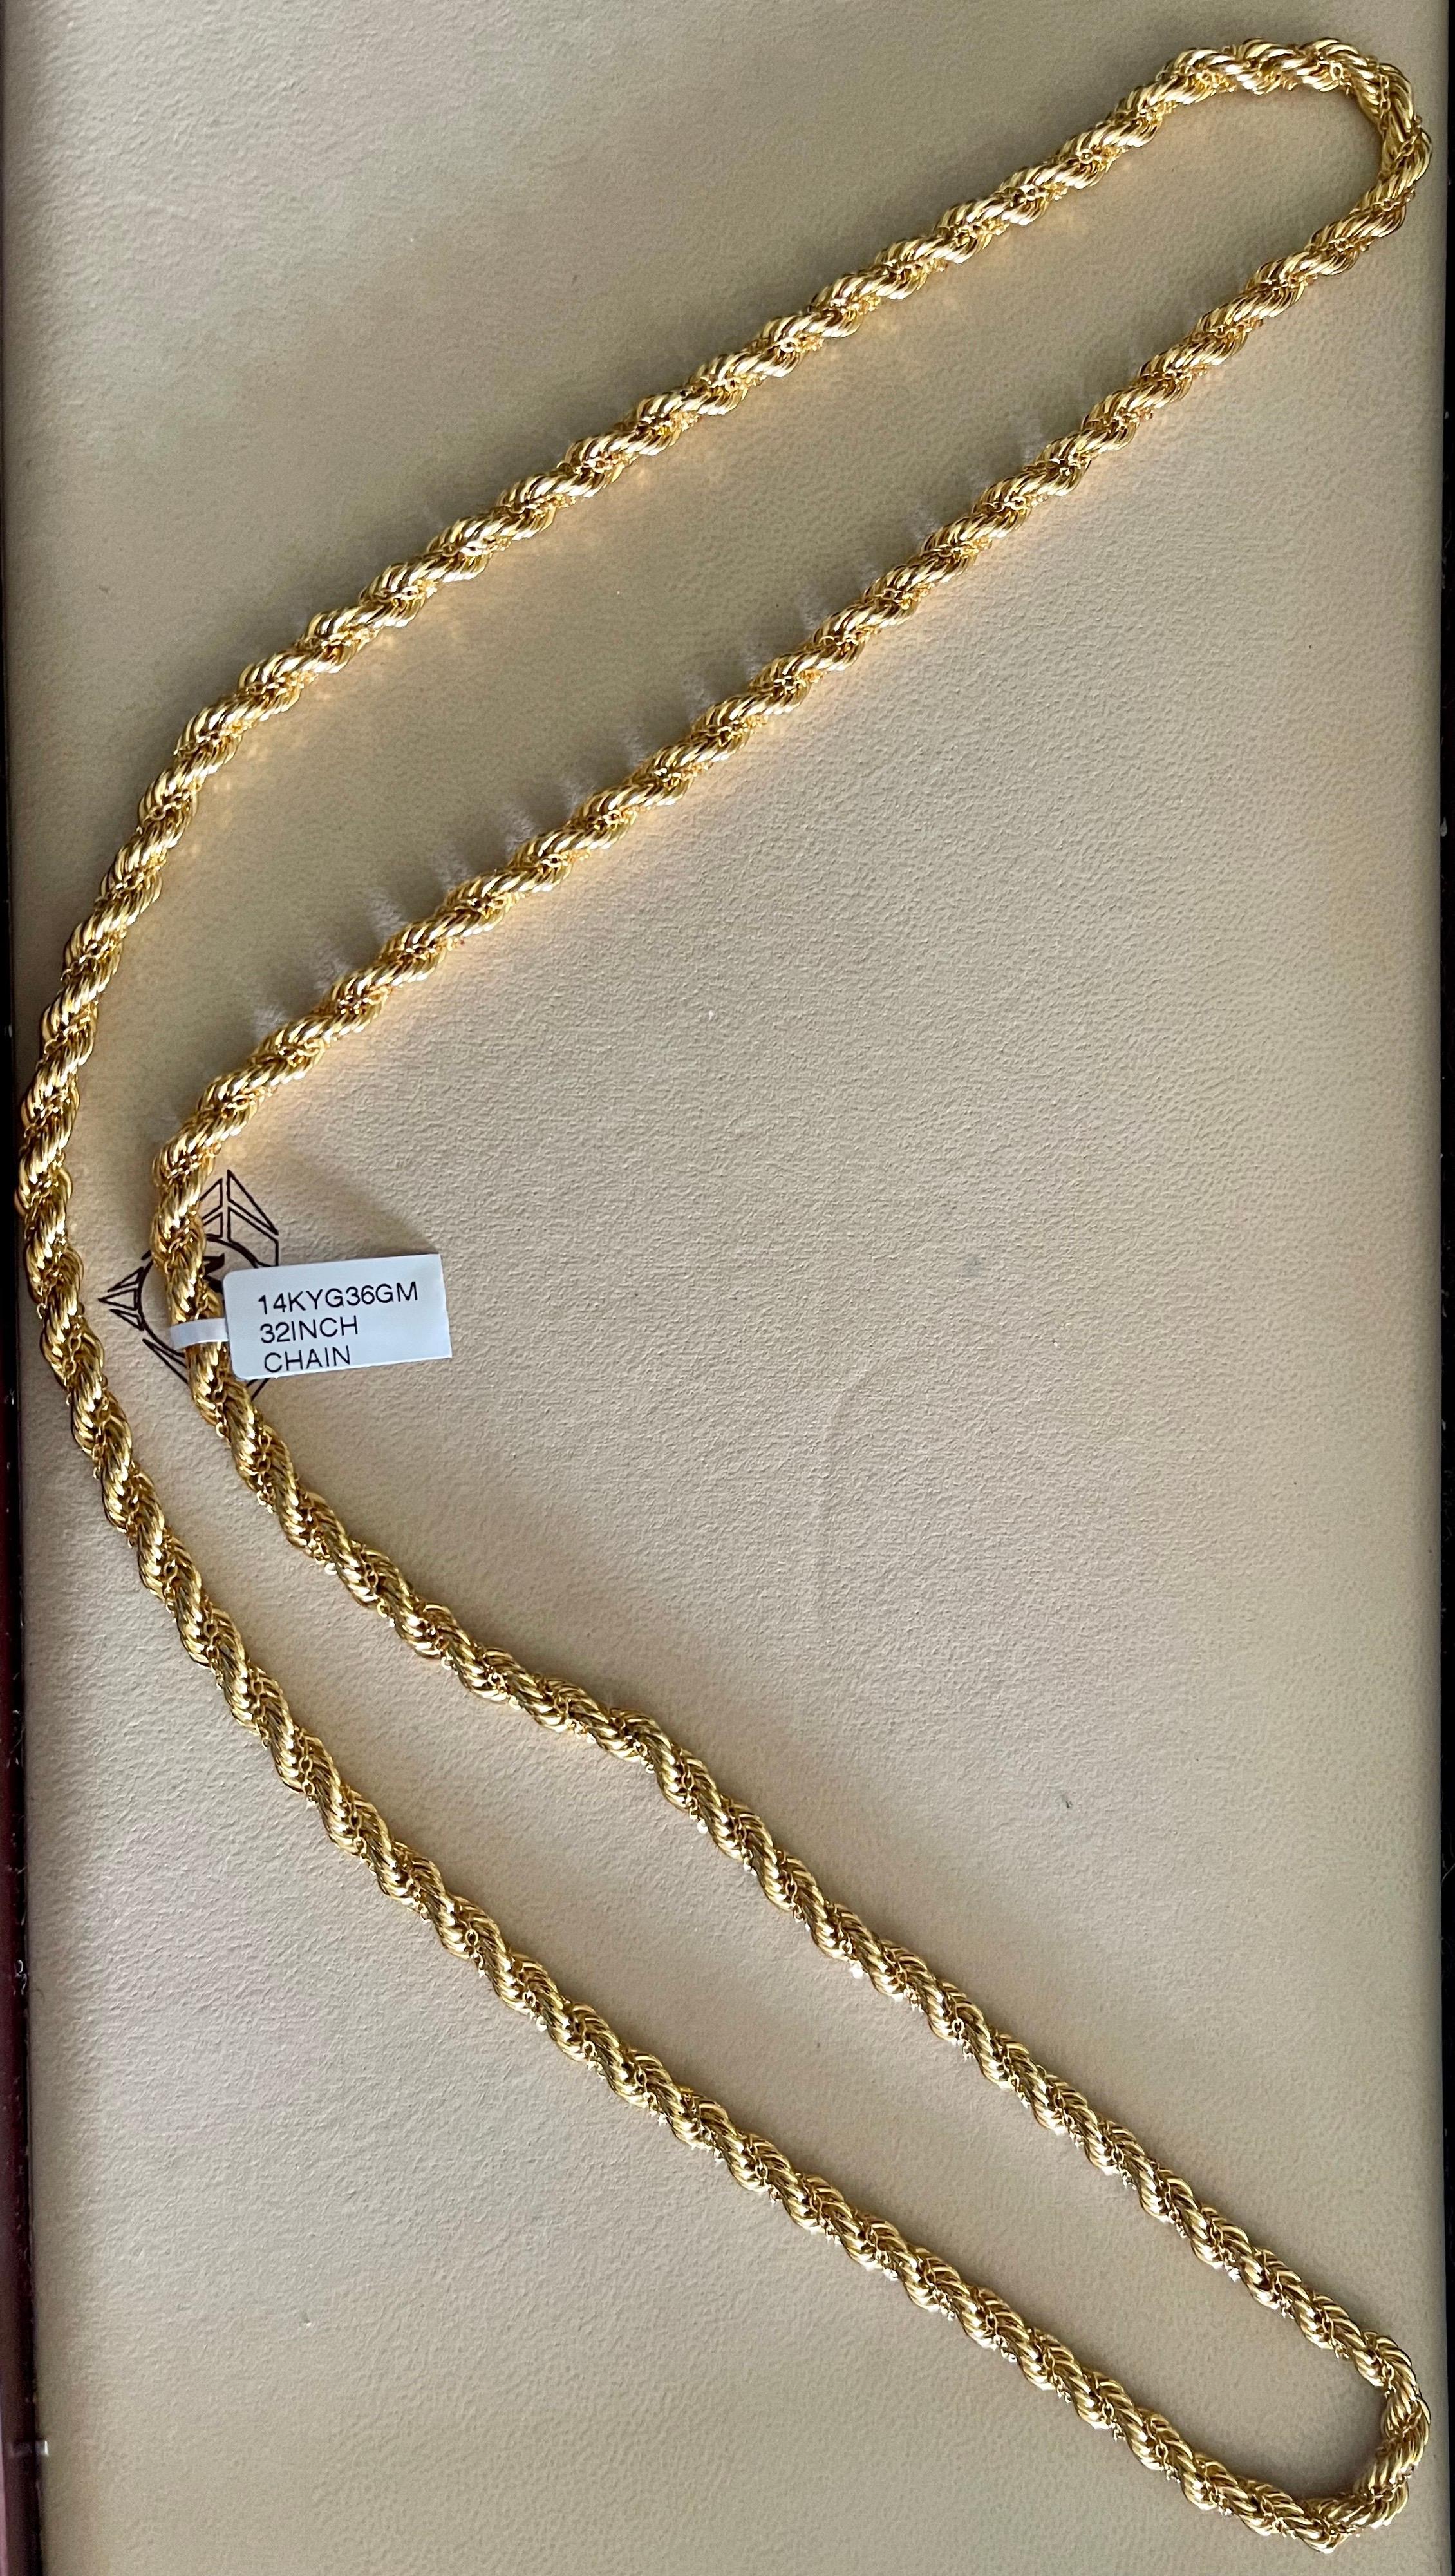 Vintage 14 Karat Yellow Gold 36 Gm Rope Chain, Long, Opera Length For Sale 2